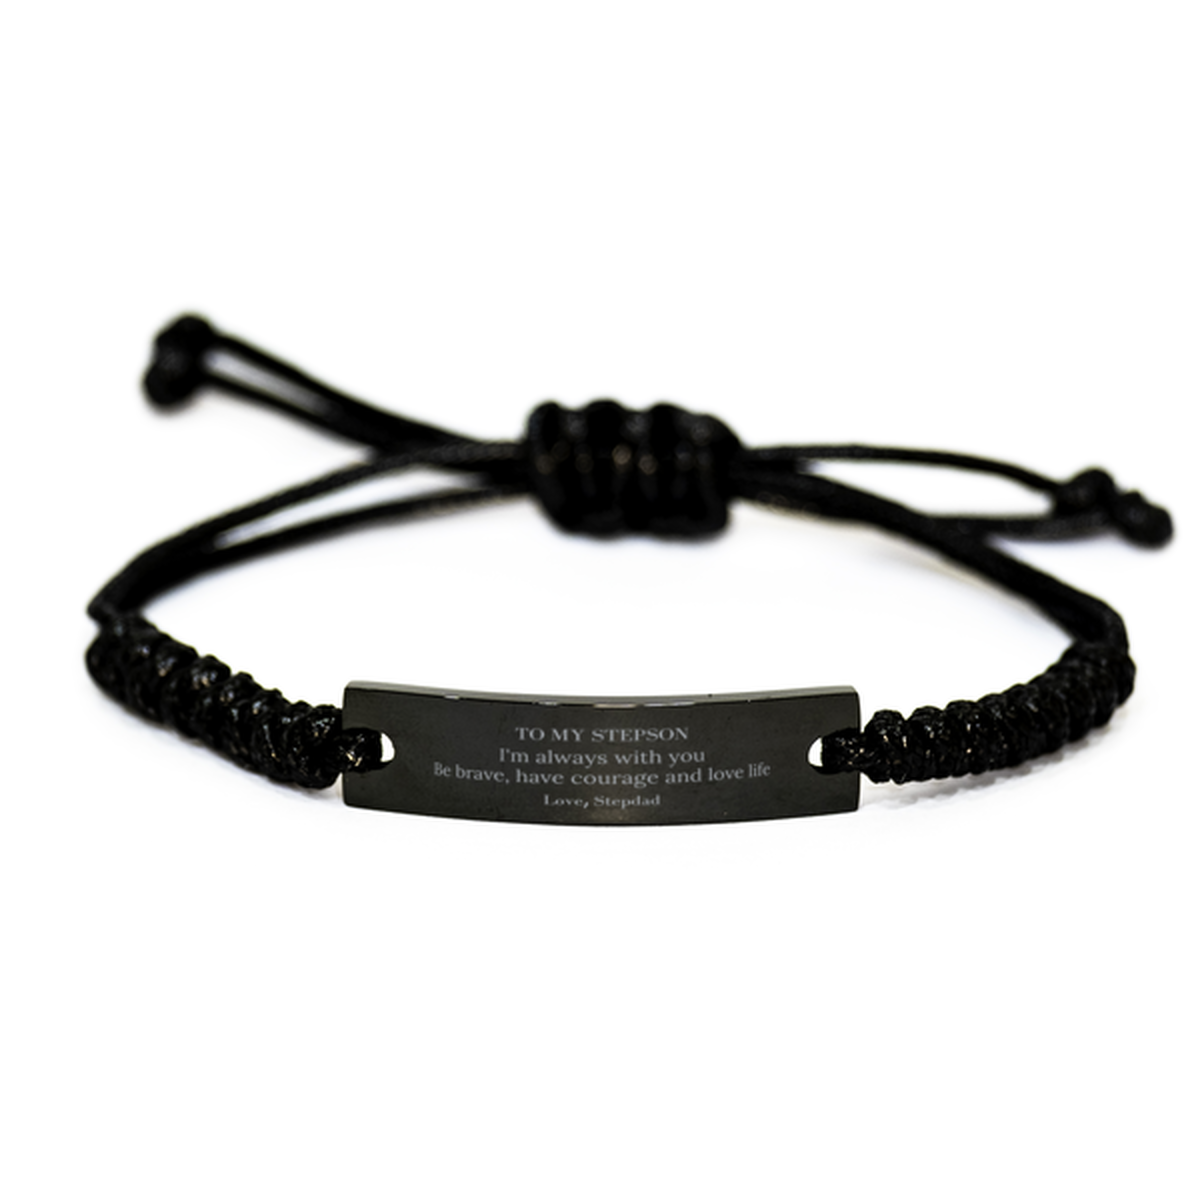 To My Stepson Gifts from Stepdad, Unique Black Rope Bracelet Inspirational Christmas Birthday Graduation Gifts for Stepson I'm always with you. Be brave, have courage and love life. Love, Stepdad